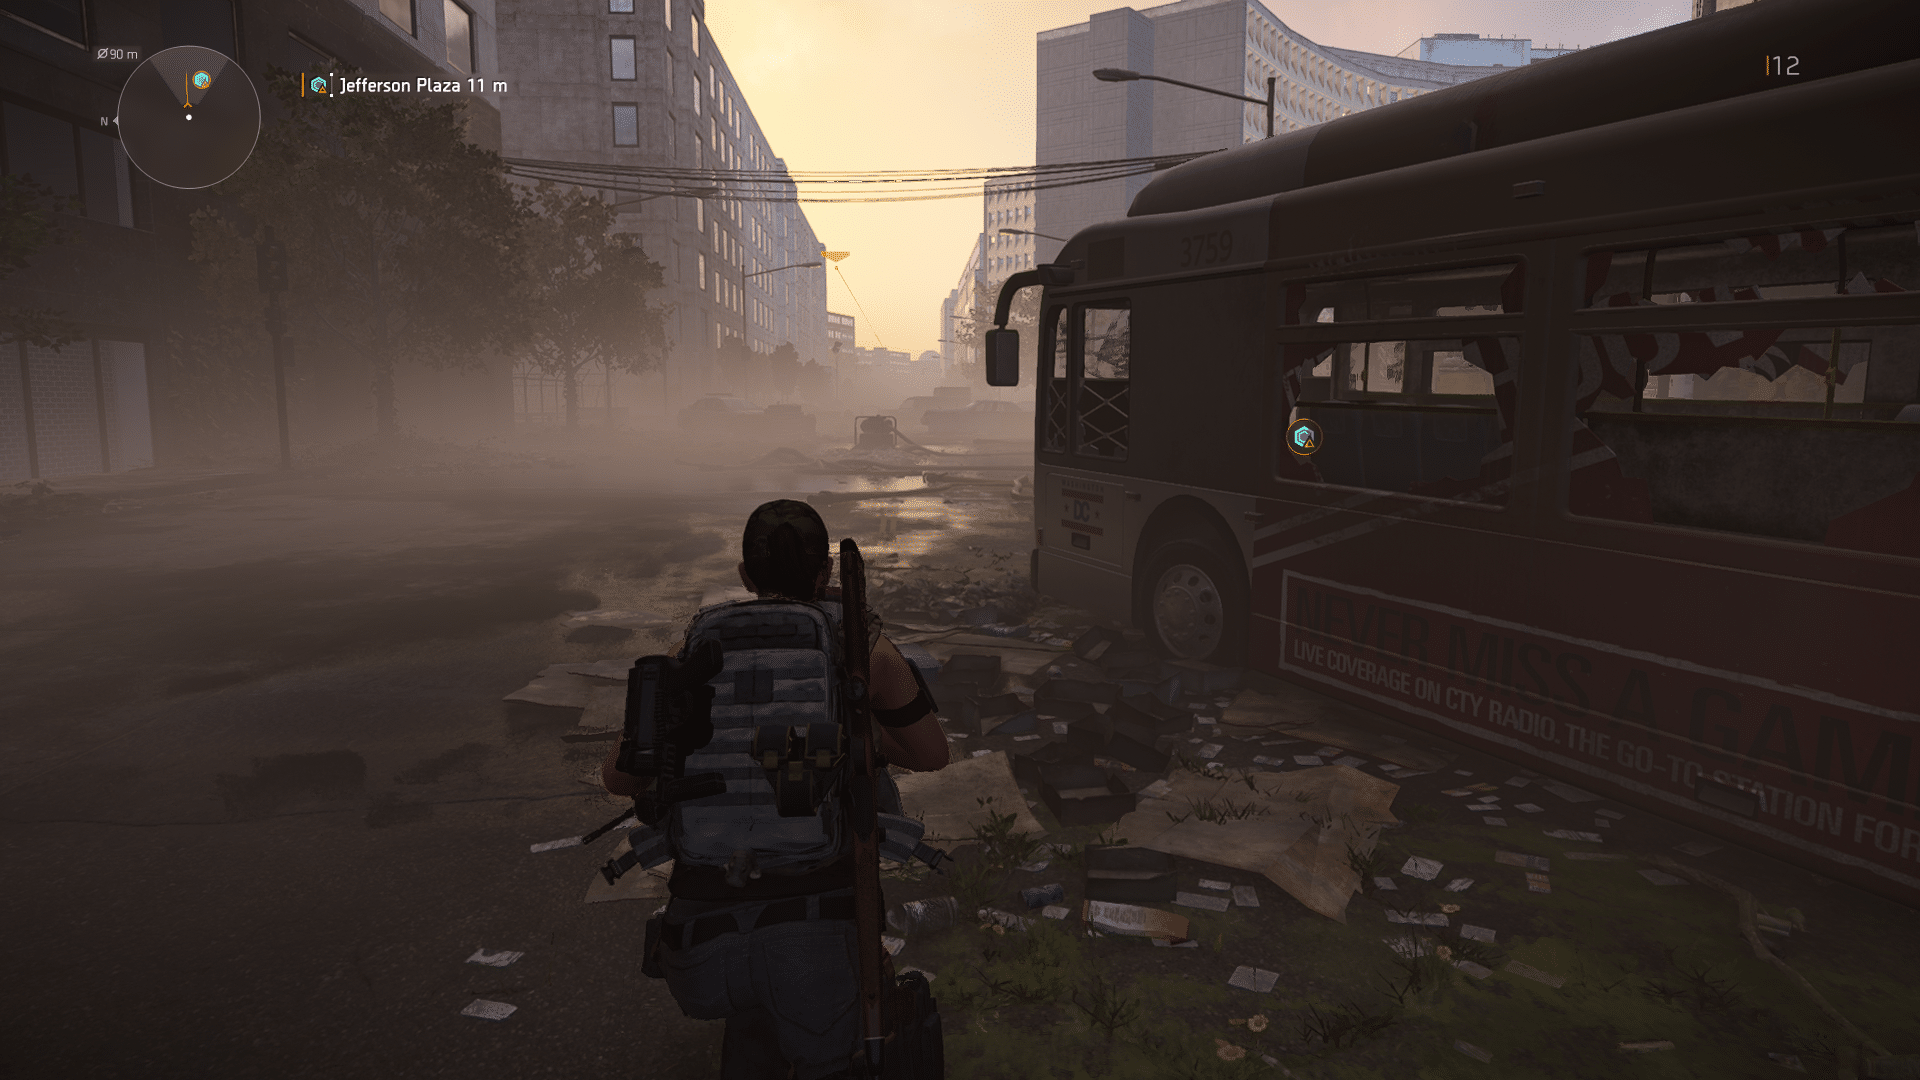 TheDivision2 3 31 2019 4 50 10 PM 707